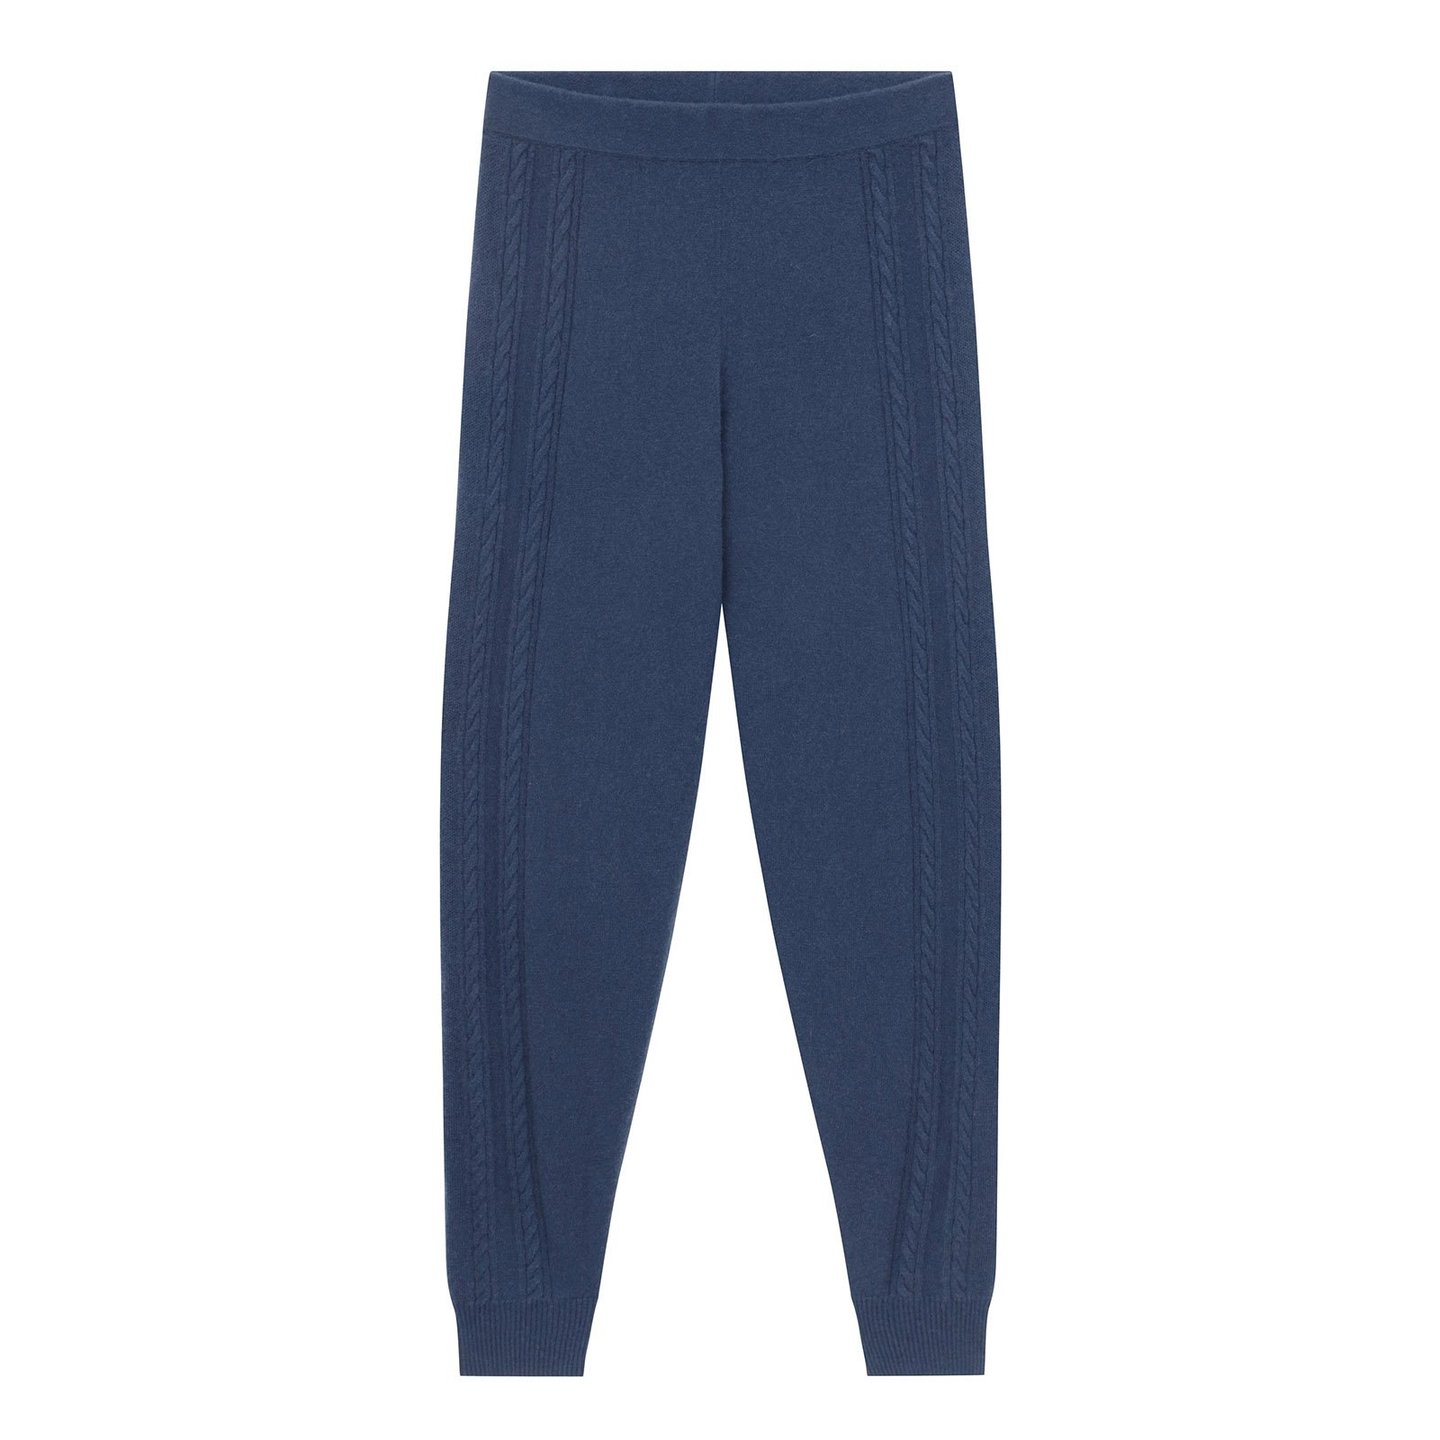 NWEB000842_Cashmere_Cable_Jogger_Stone_Blue_1440x.jpg